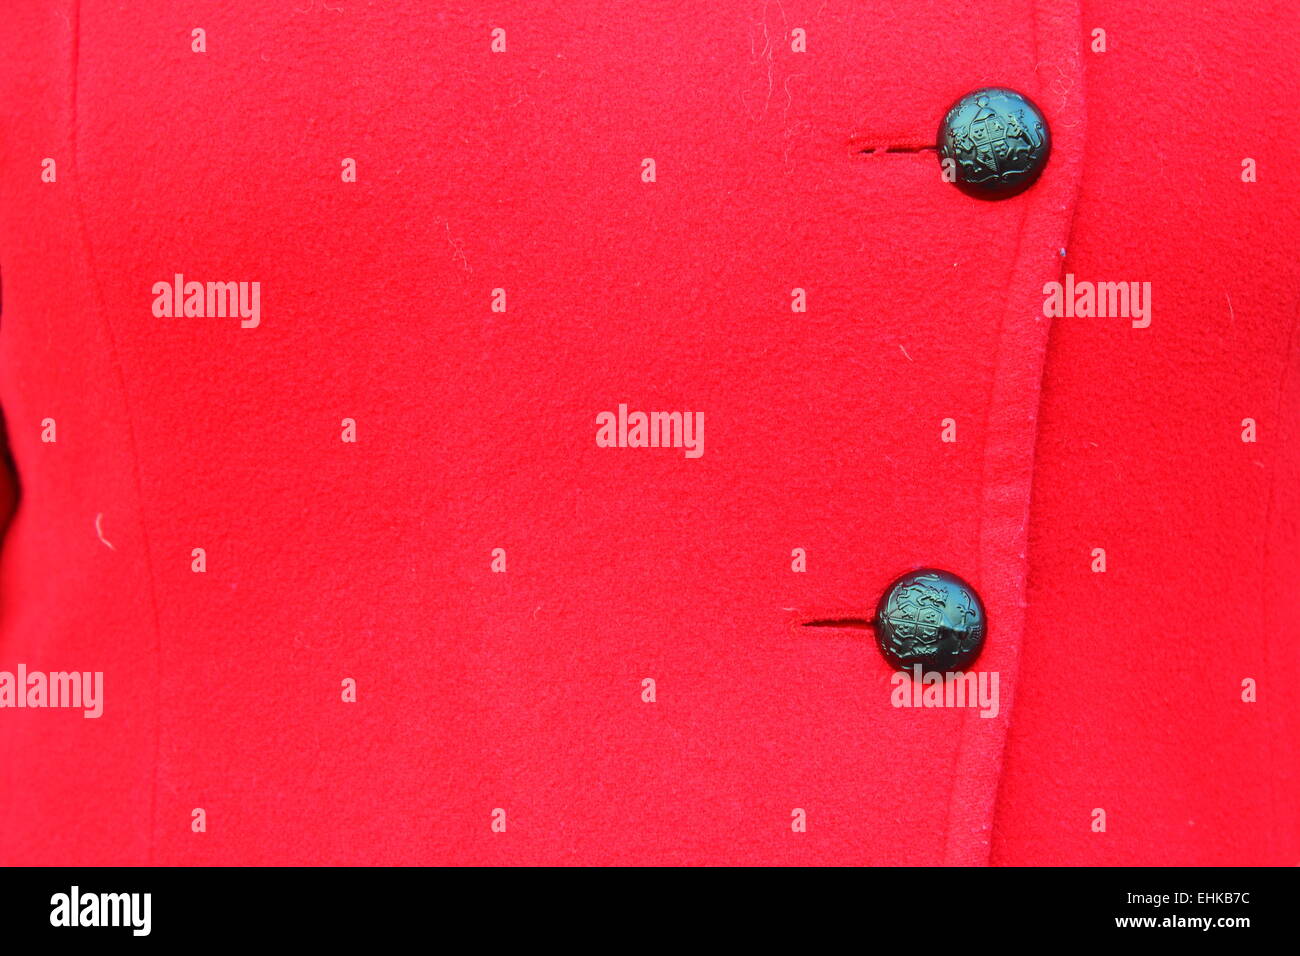 on the red coat hanging black two buttons Stock Photo